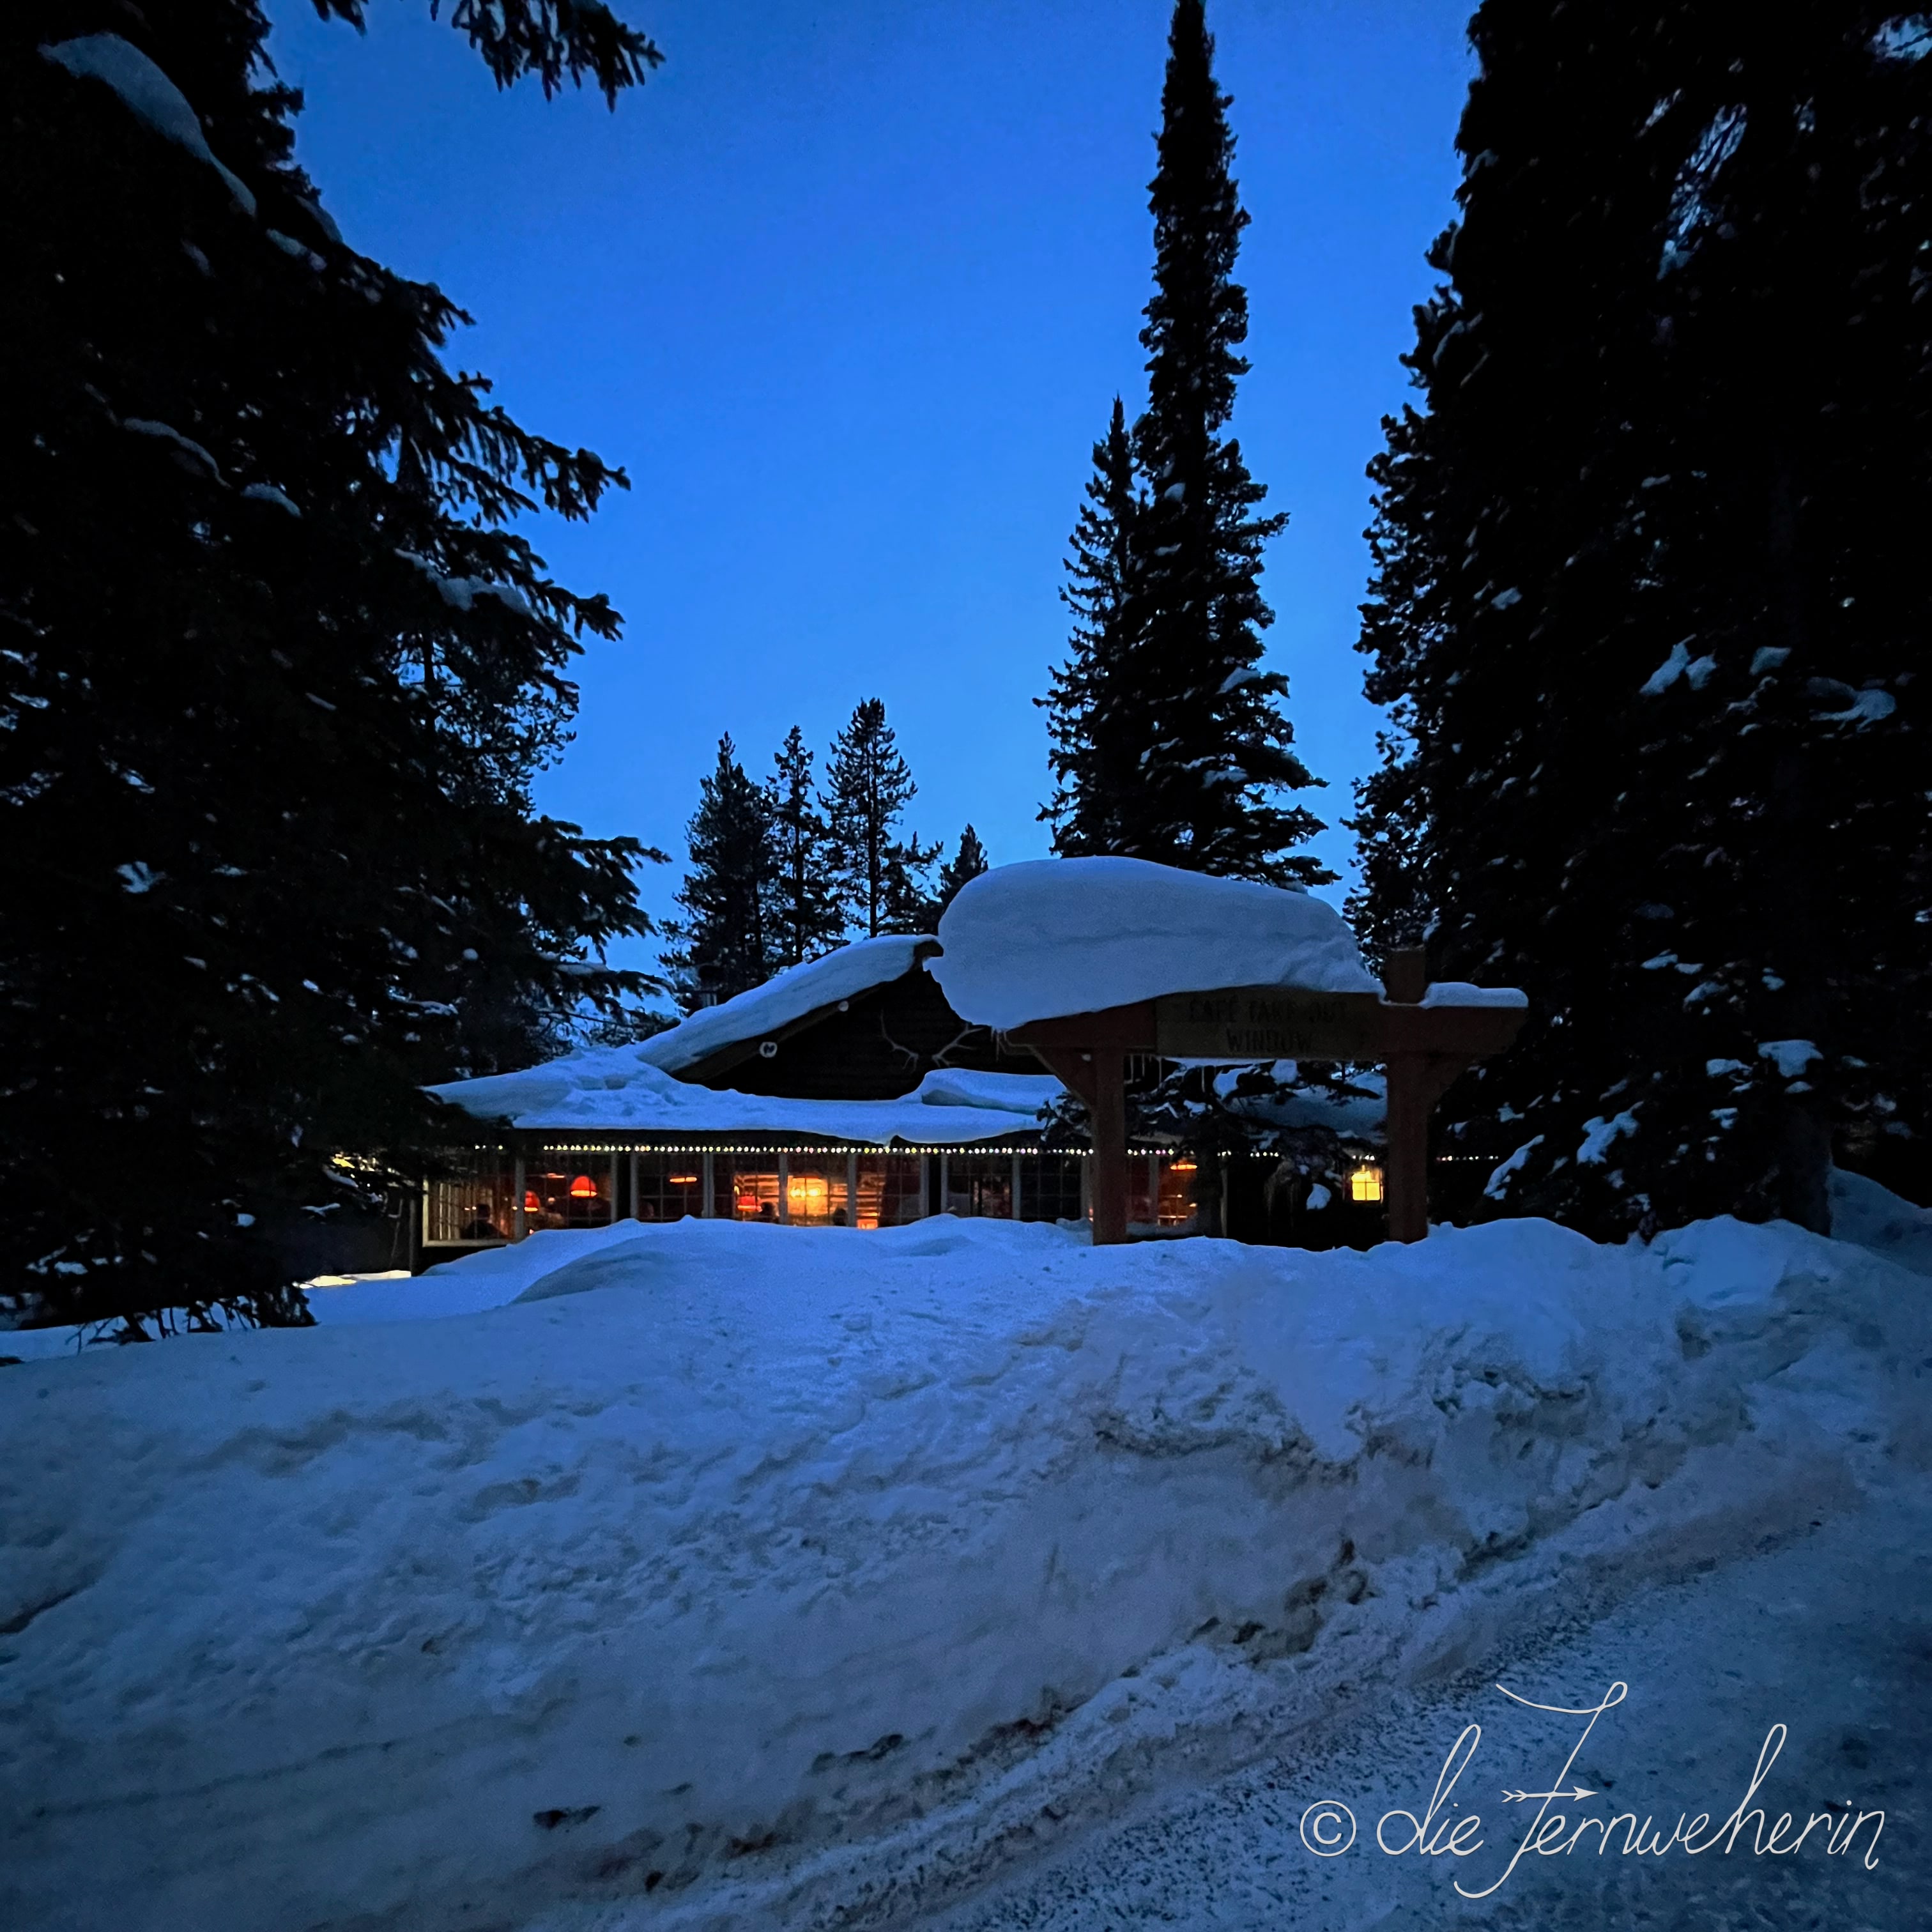 Dusk falls on snow-covered Storm Mountain Lodge, a restaurant in Banff National Park.